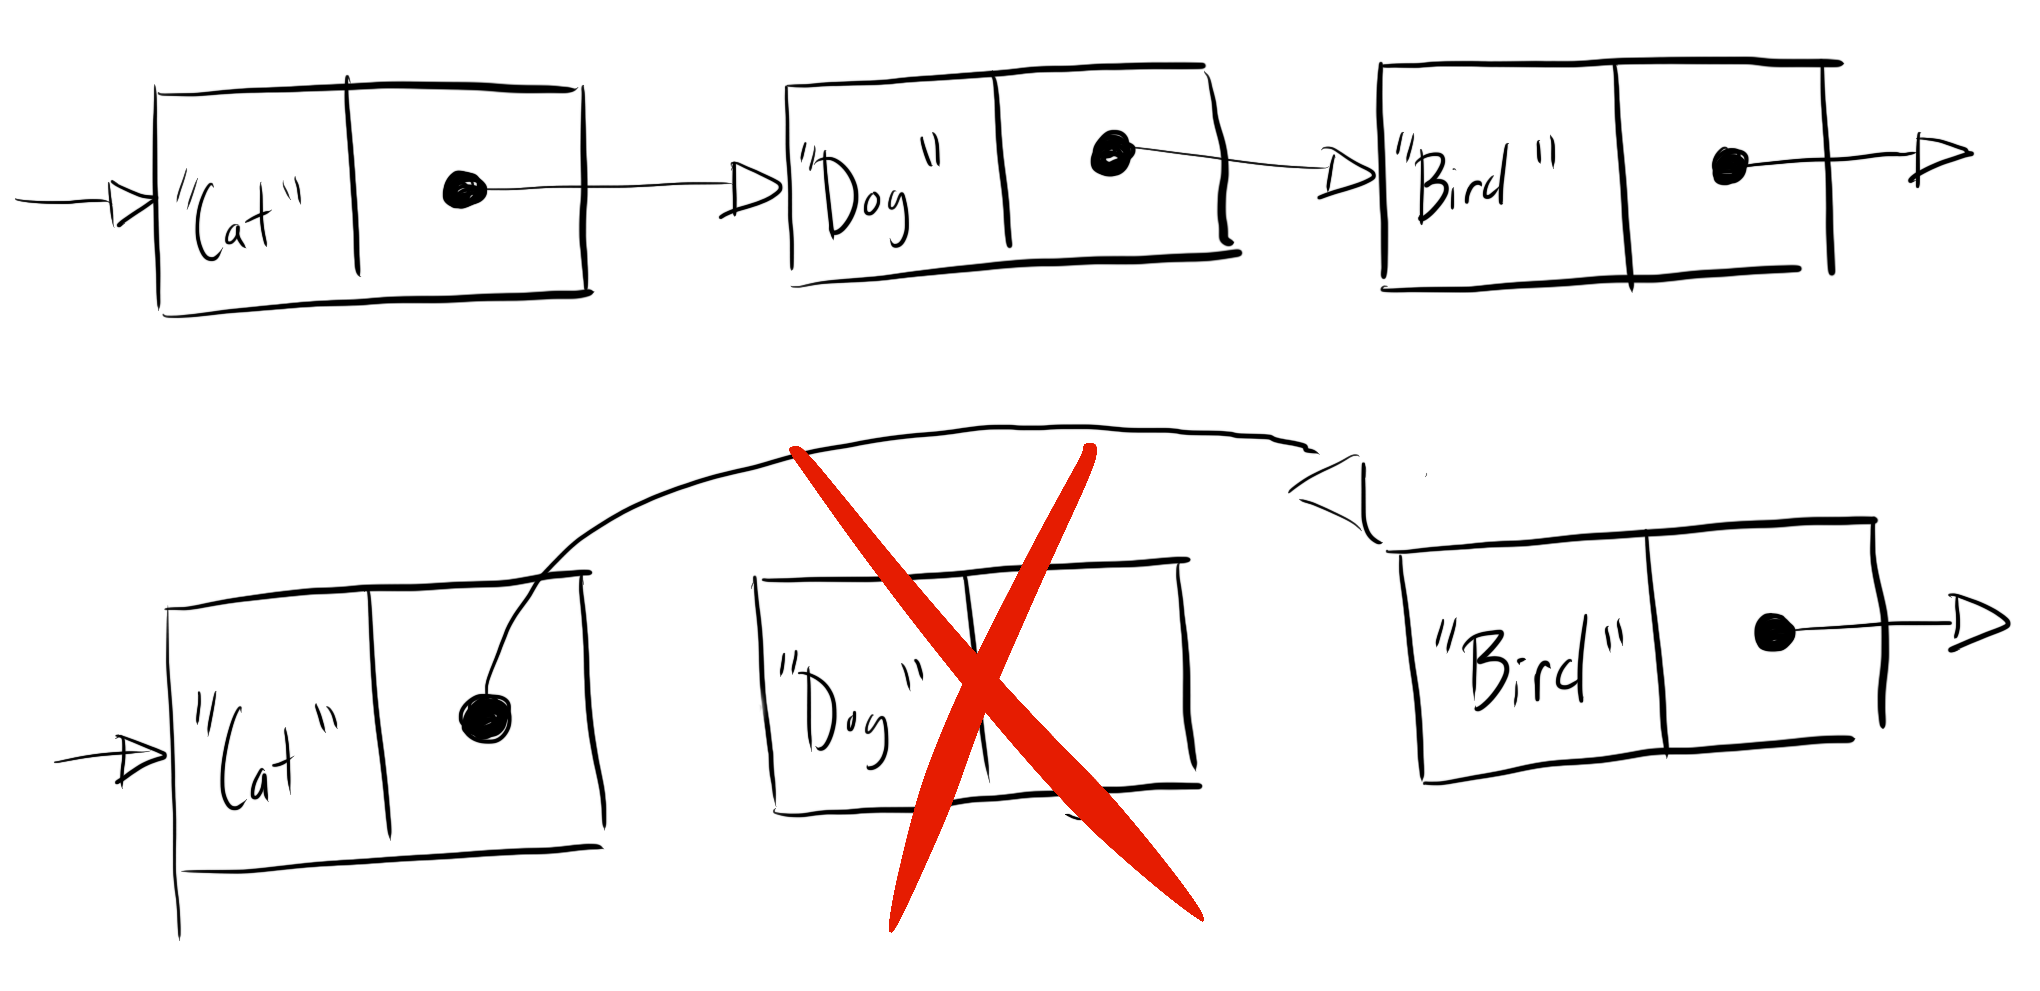 Diagram that demonstrates how linked lists remove a node from a linked list by moving pointer references